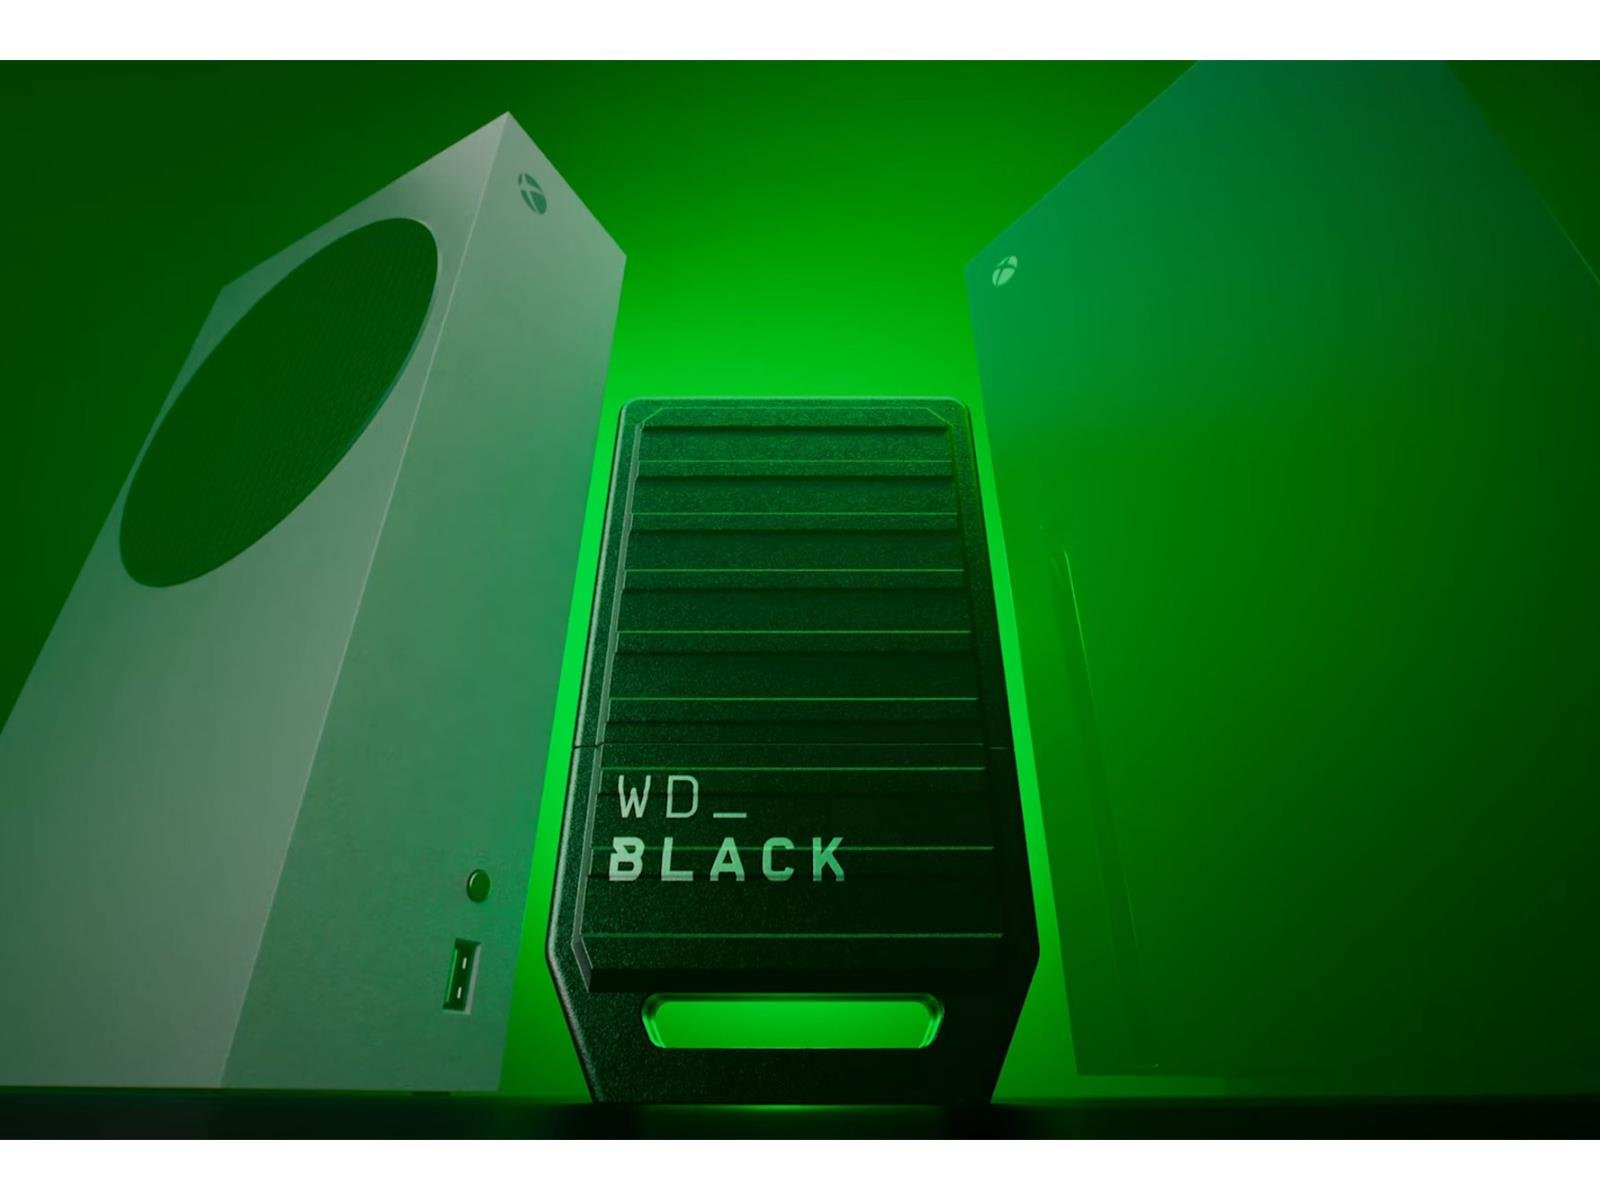 Xbox Series XS Game Drives - Package WD BLACK C50 1TB Expansion